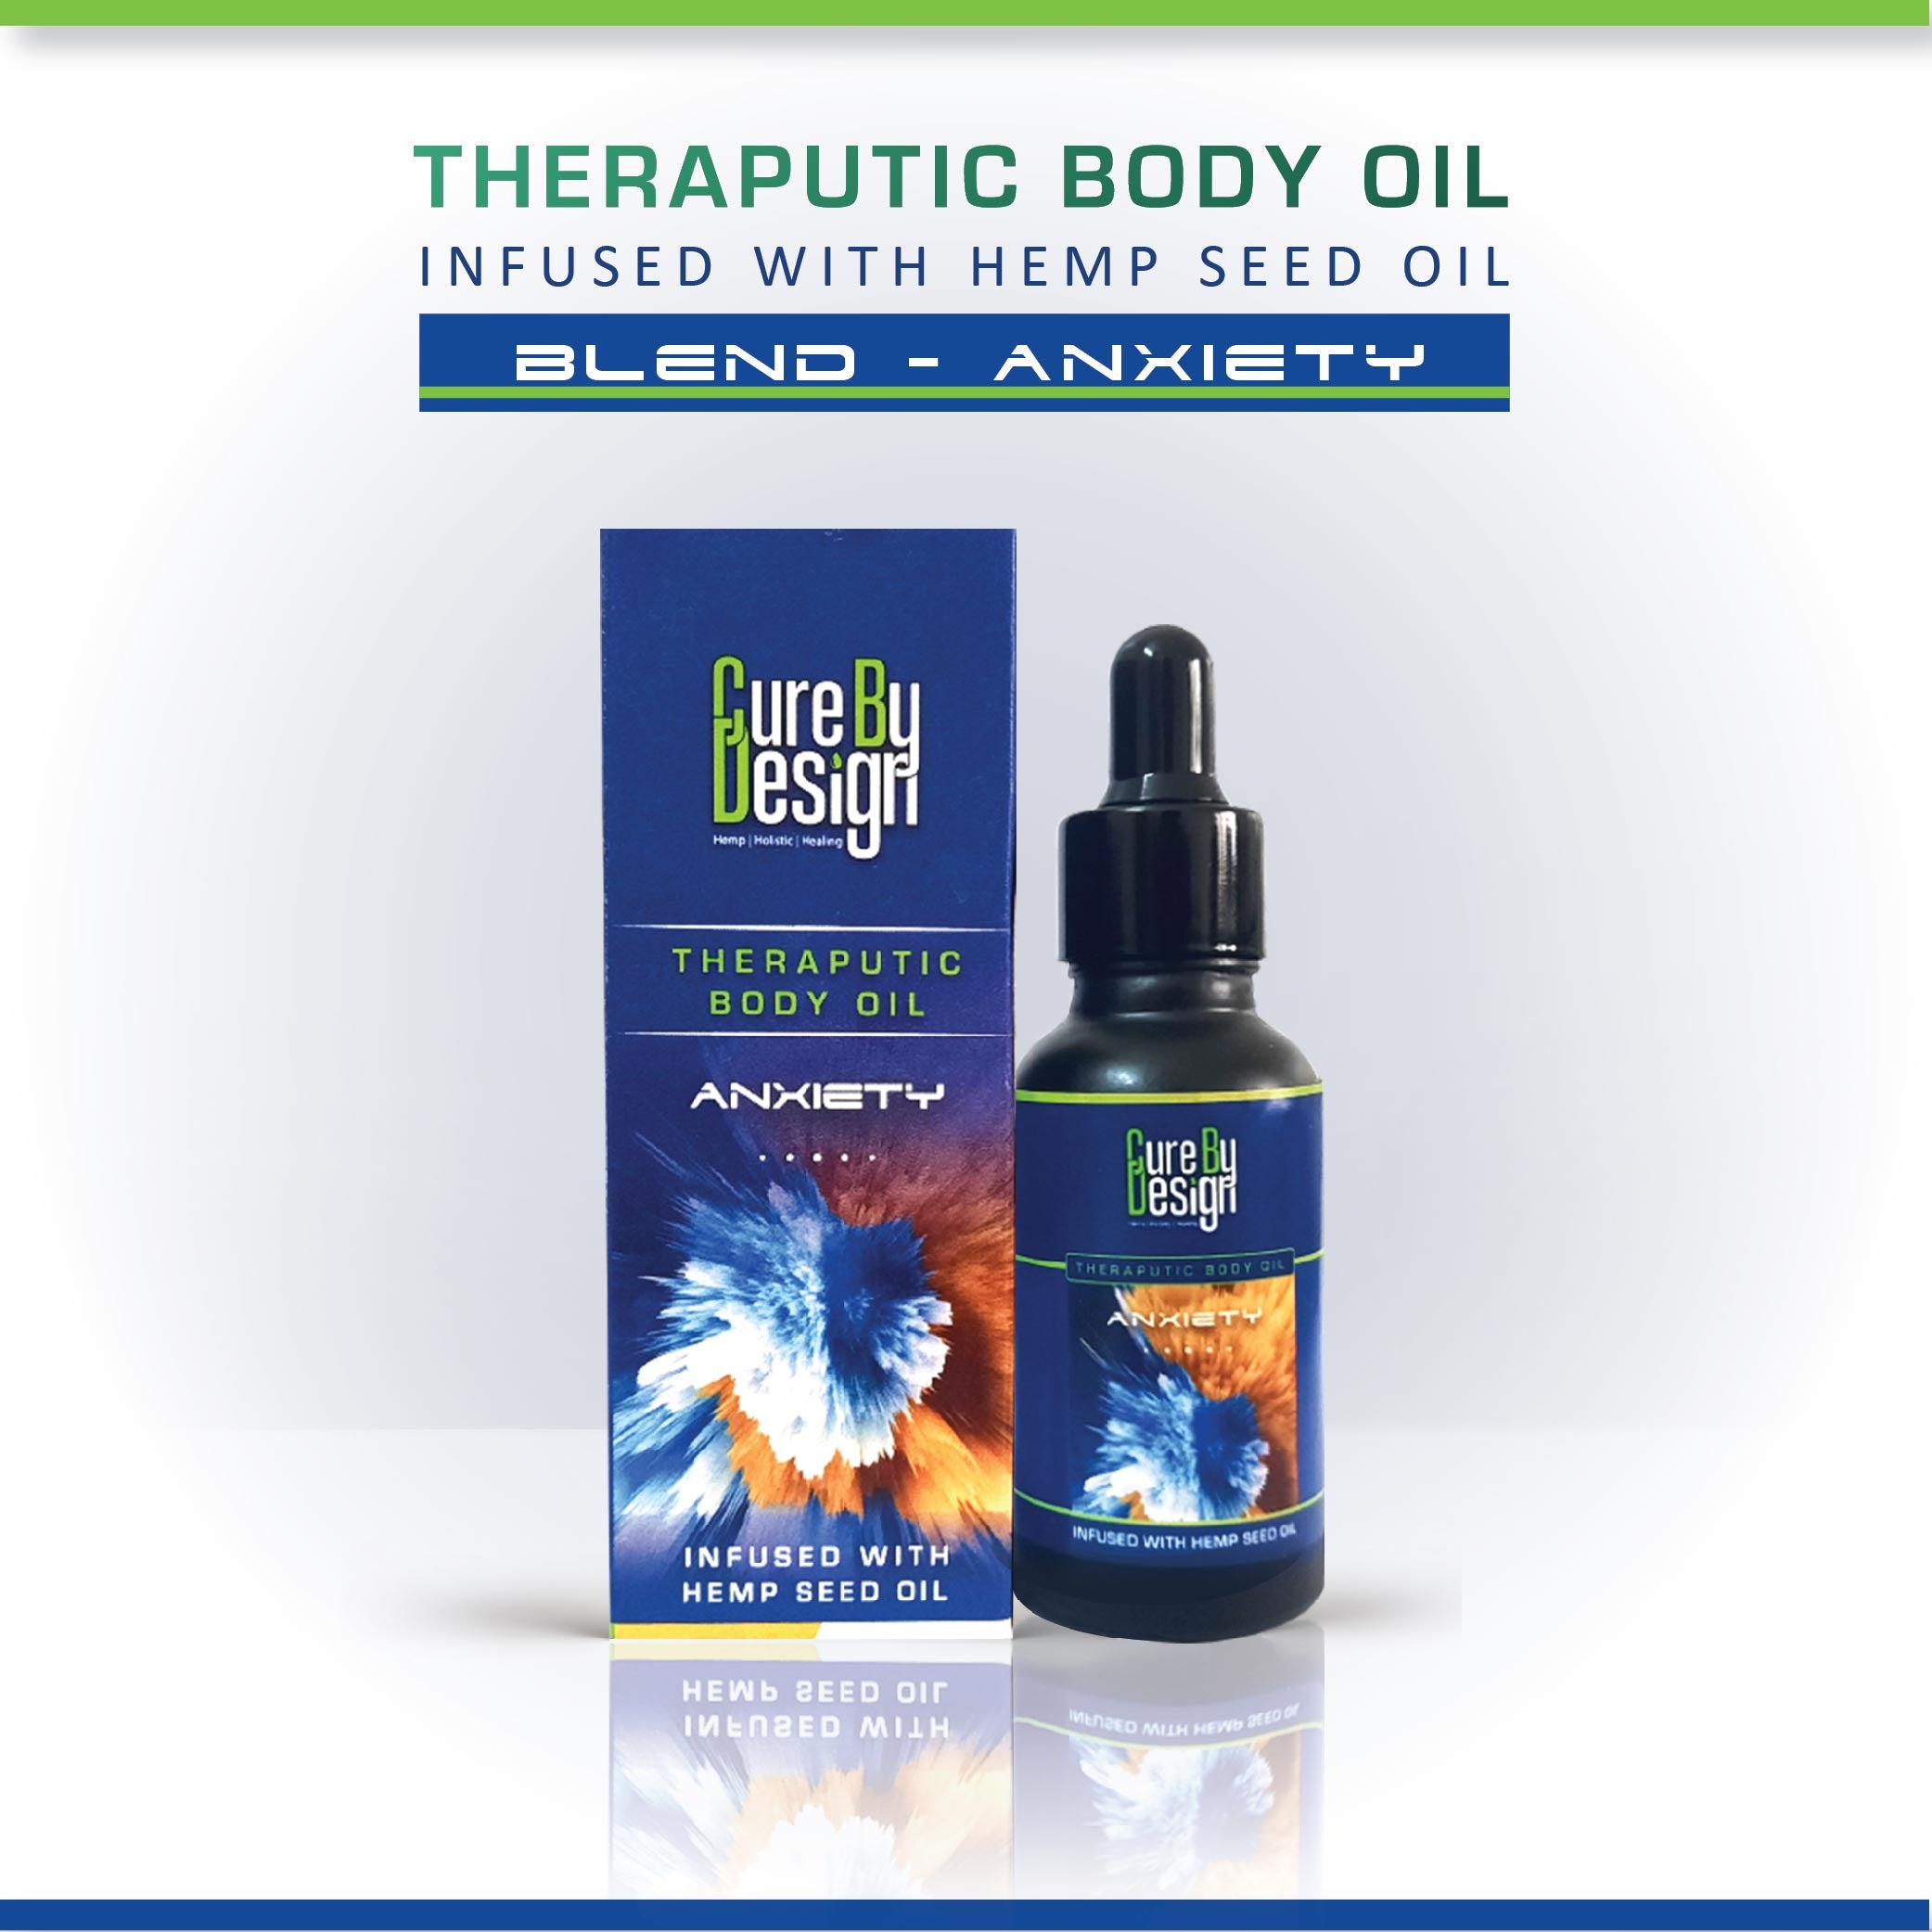 Cure By Design Therapeutic Healing Blend - Anxiety